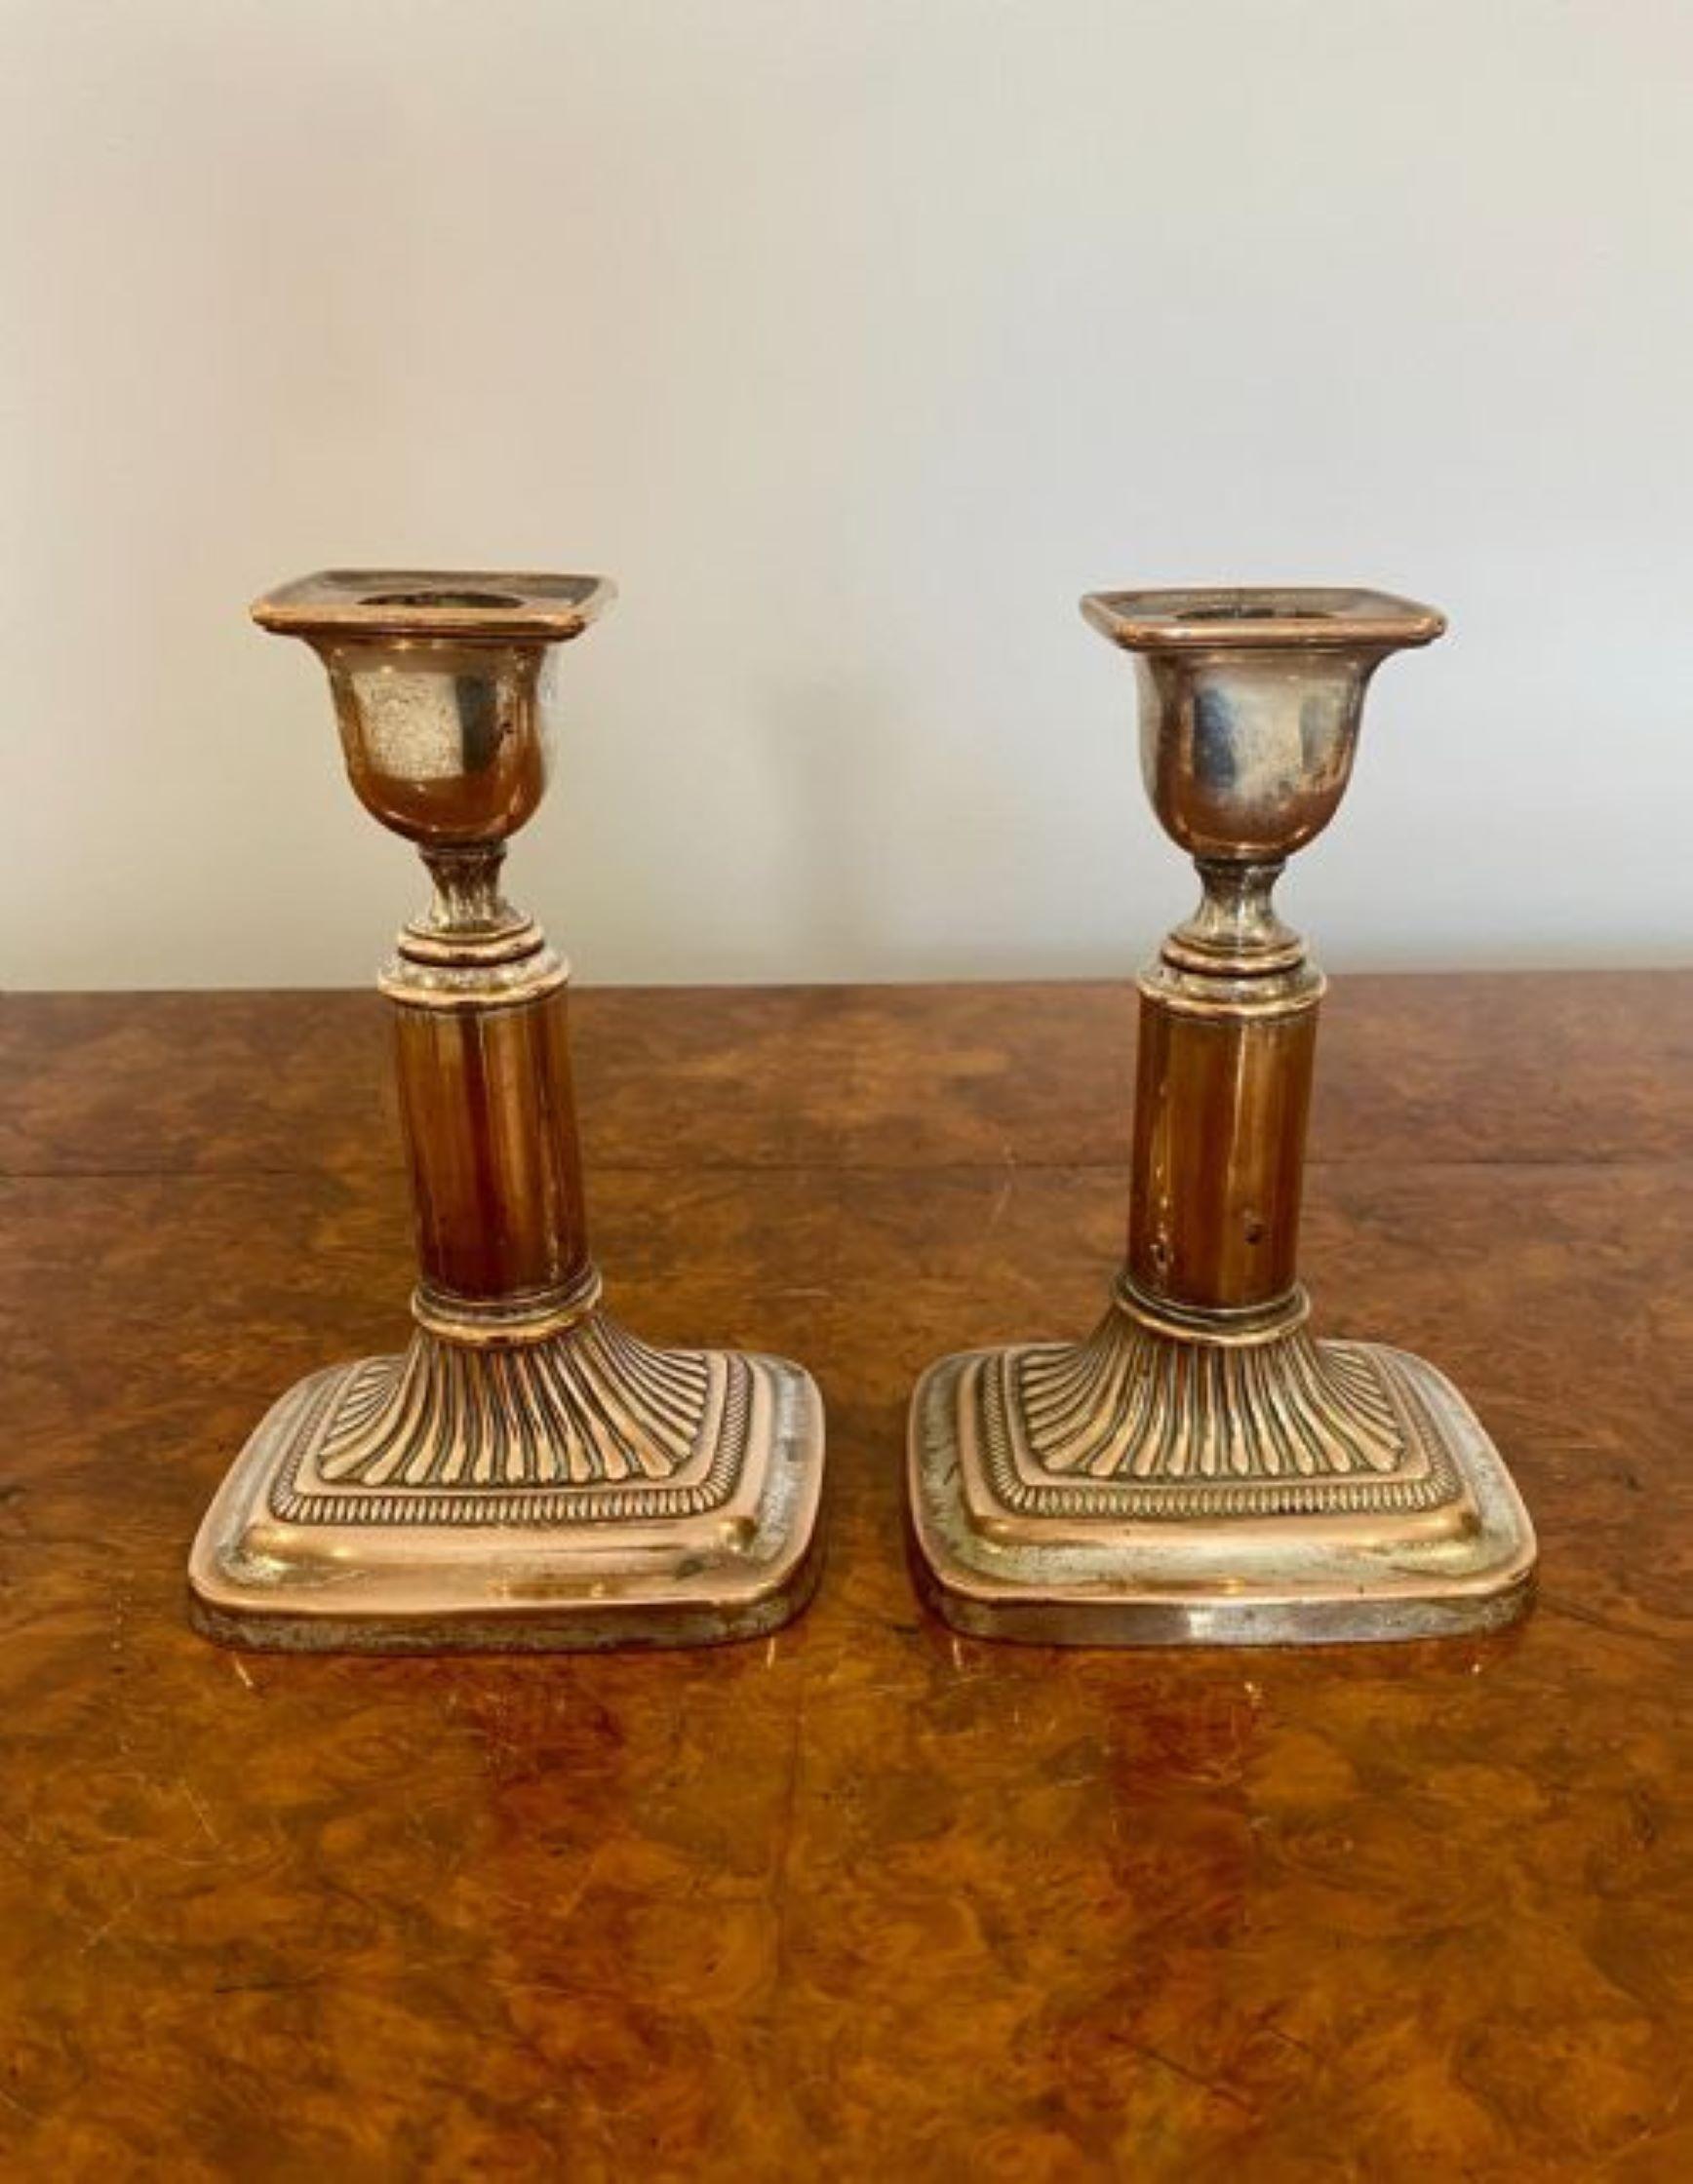 Pair of antique quality Victorian Sheffield plated telescopic candlesticks, quality pair of antique old Sheffield plated telescopic candlesticks on a reeded rectangular base